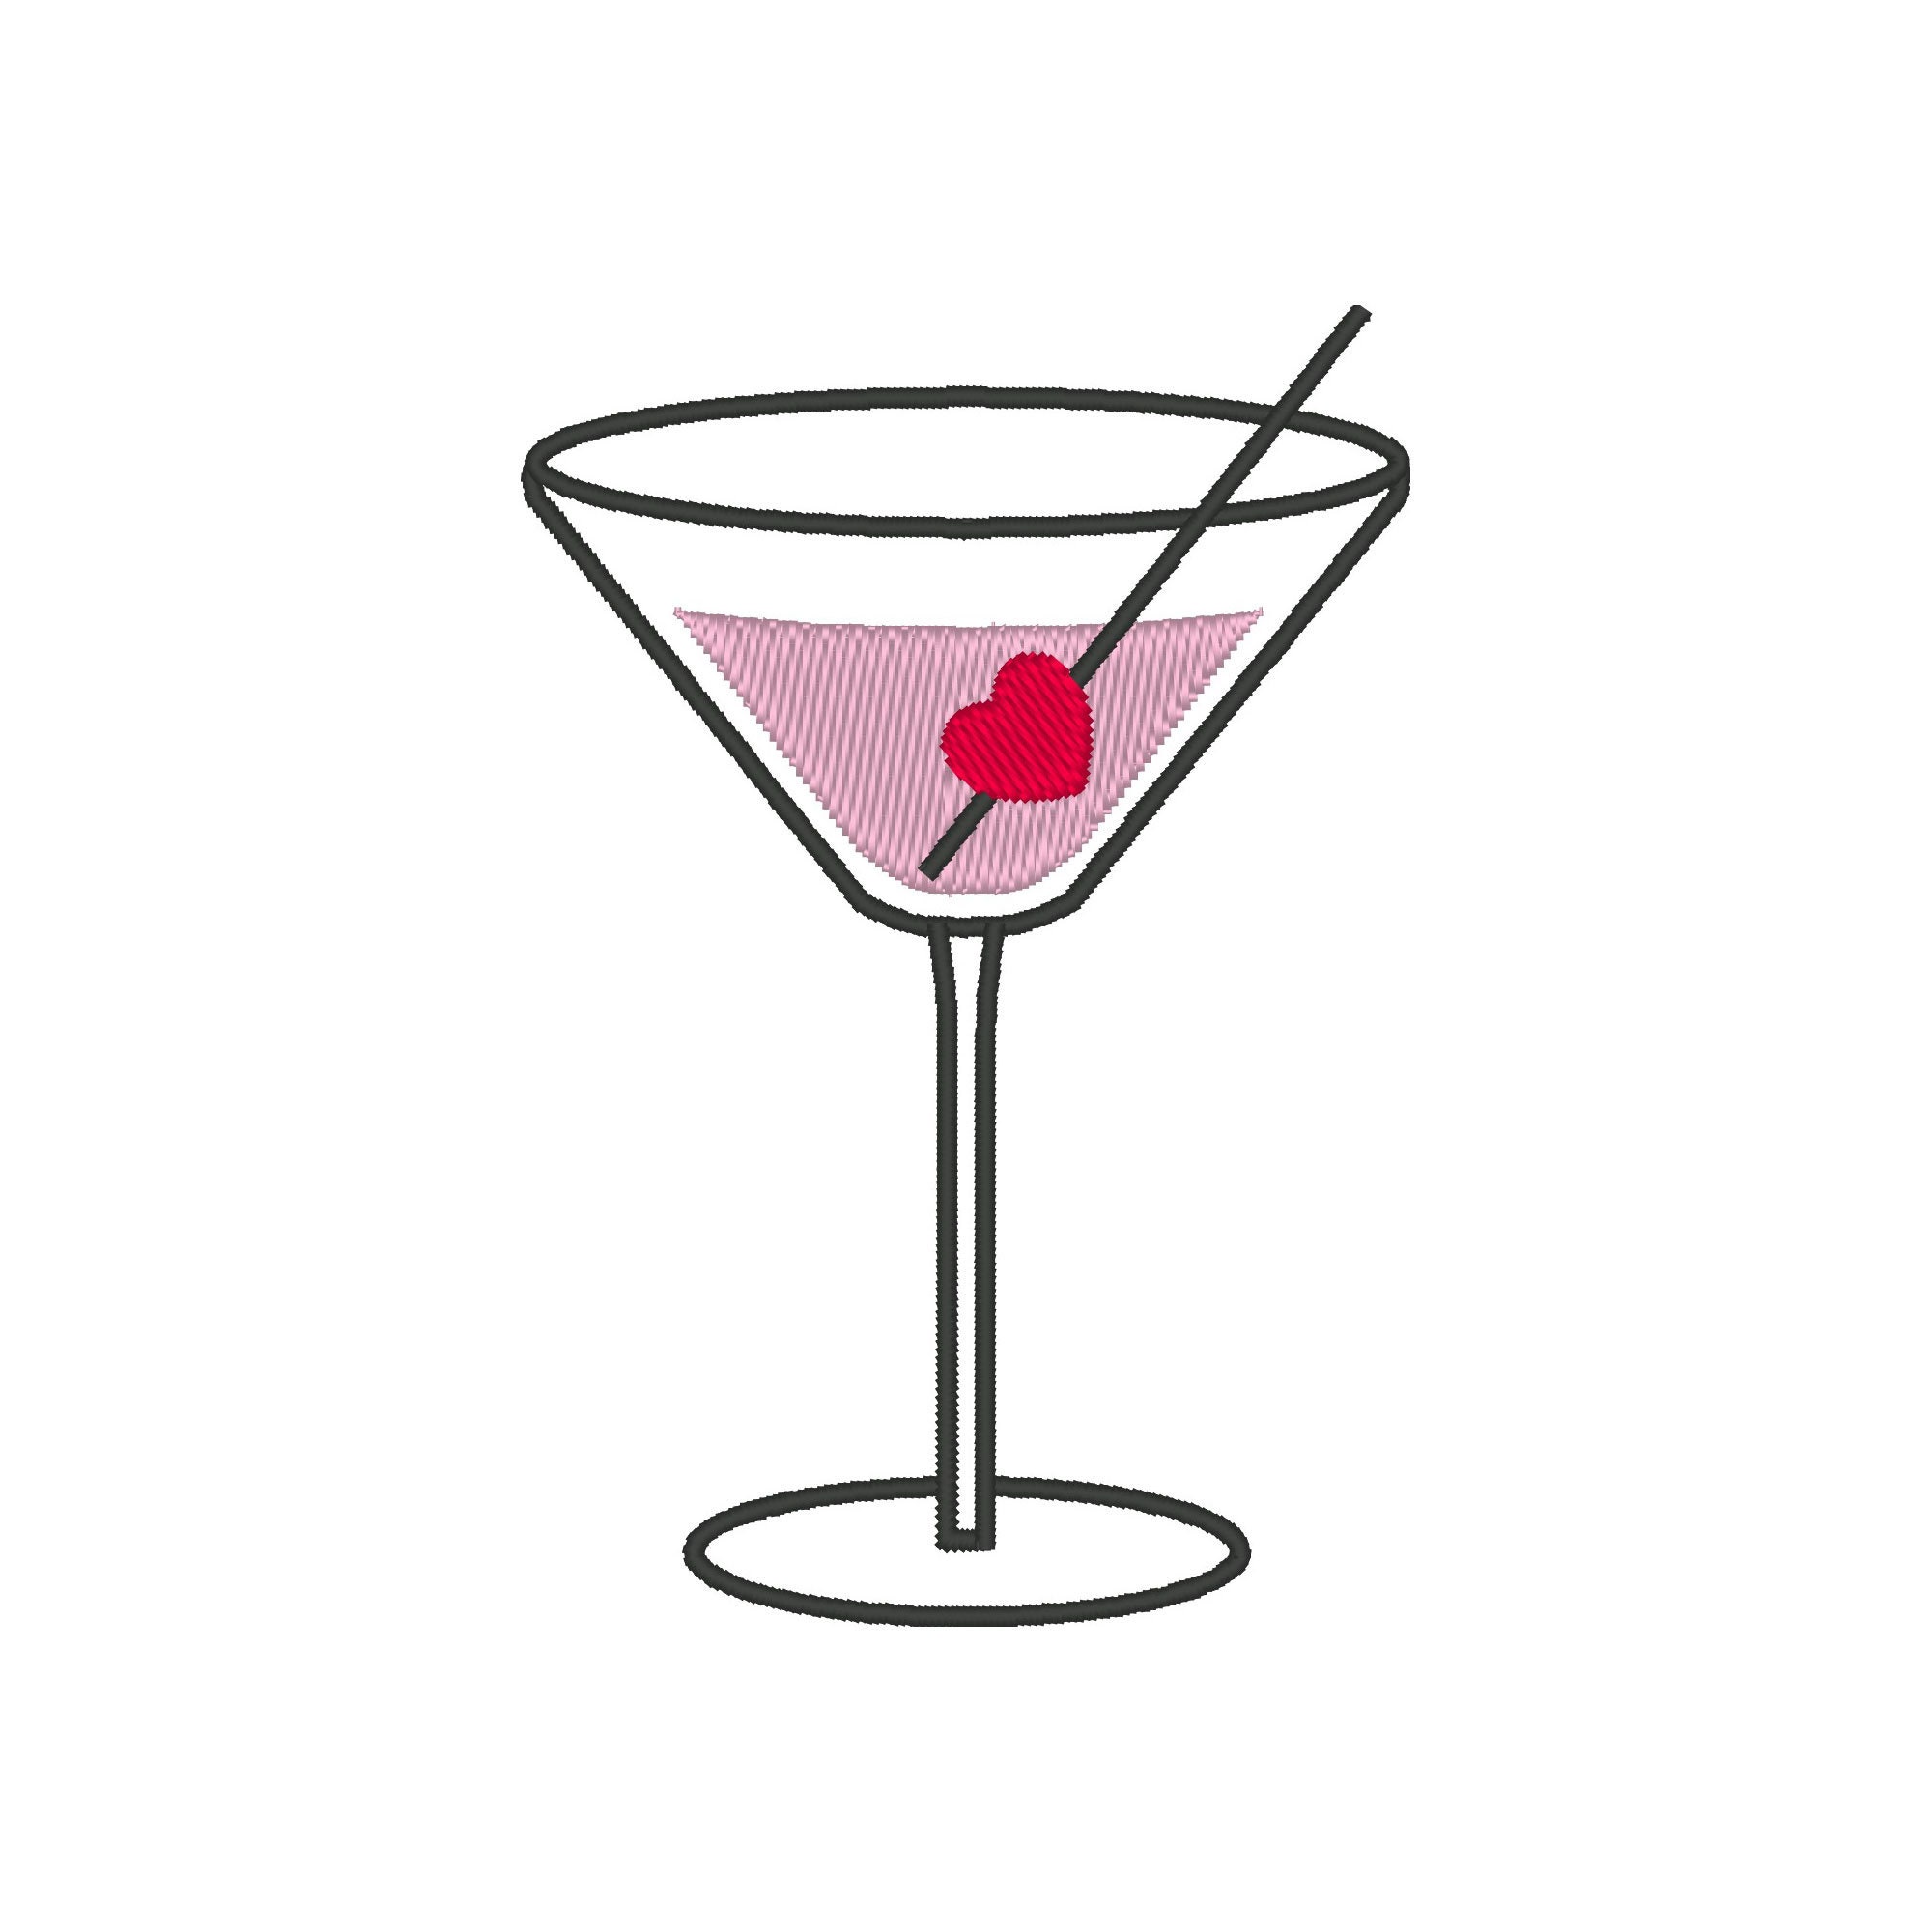 BestAlice 2 Pcs Cocktail Glass Martini Glasses, 8 Oz Creative Heart Shaped  Cocktail Glasses With Str…See more BestAlice 2 Pcs Cocktail Glass Martini